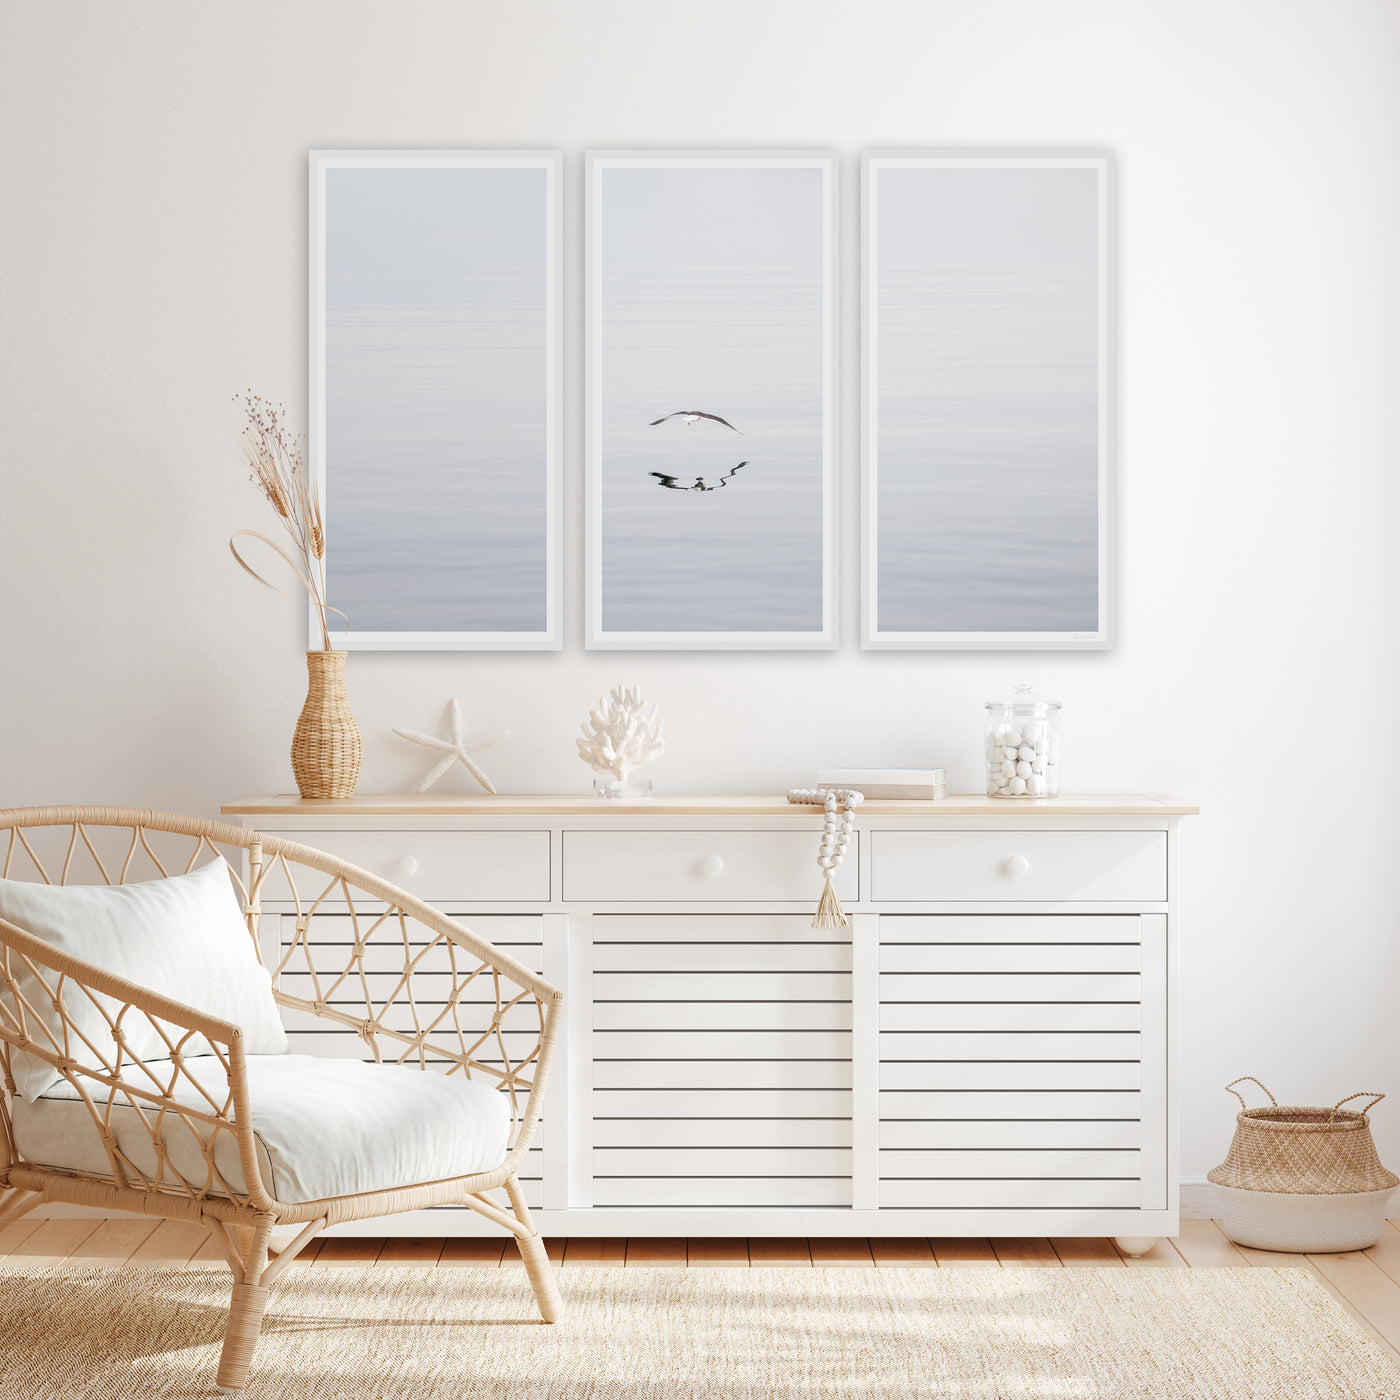 Early Morning Flight - 3 piece art set by Cattie Coyle Photography above beach house dresser